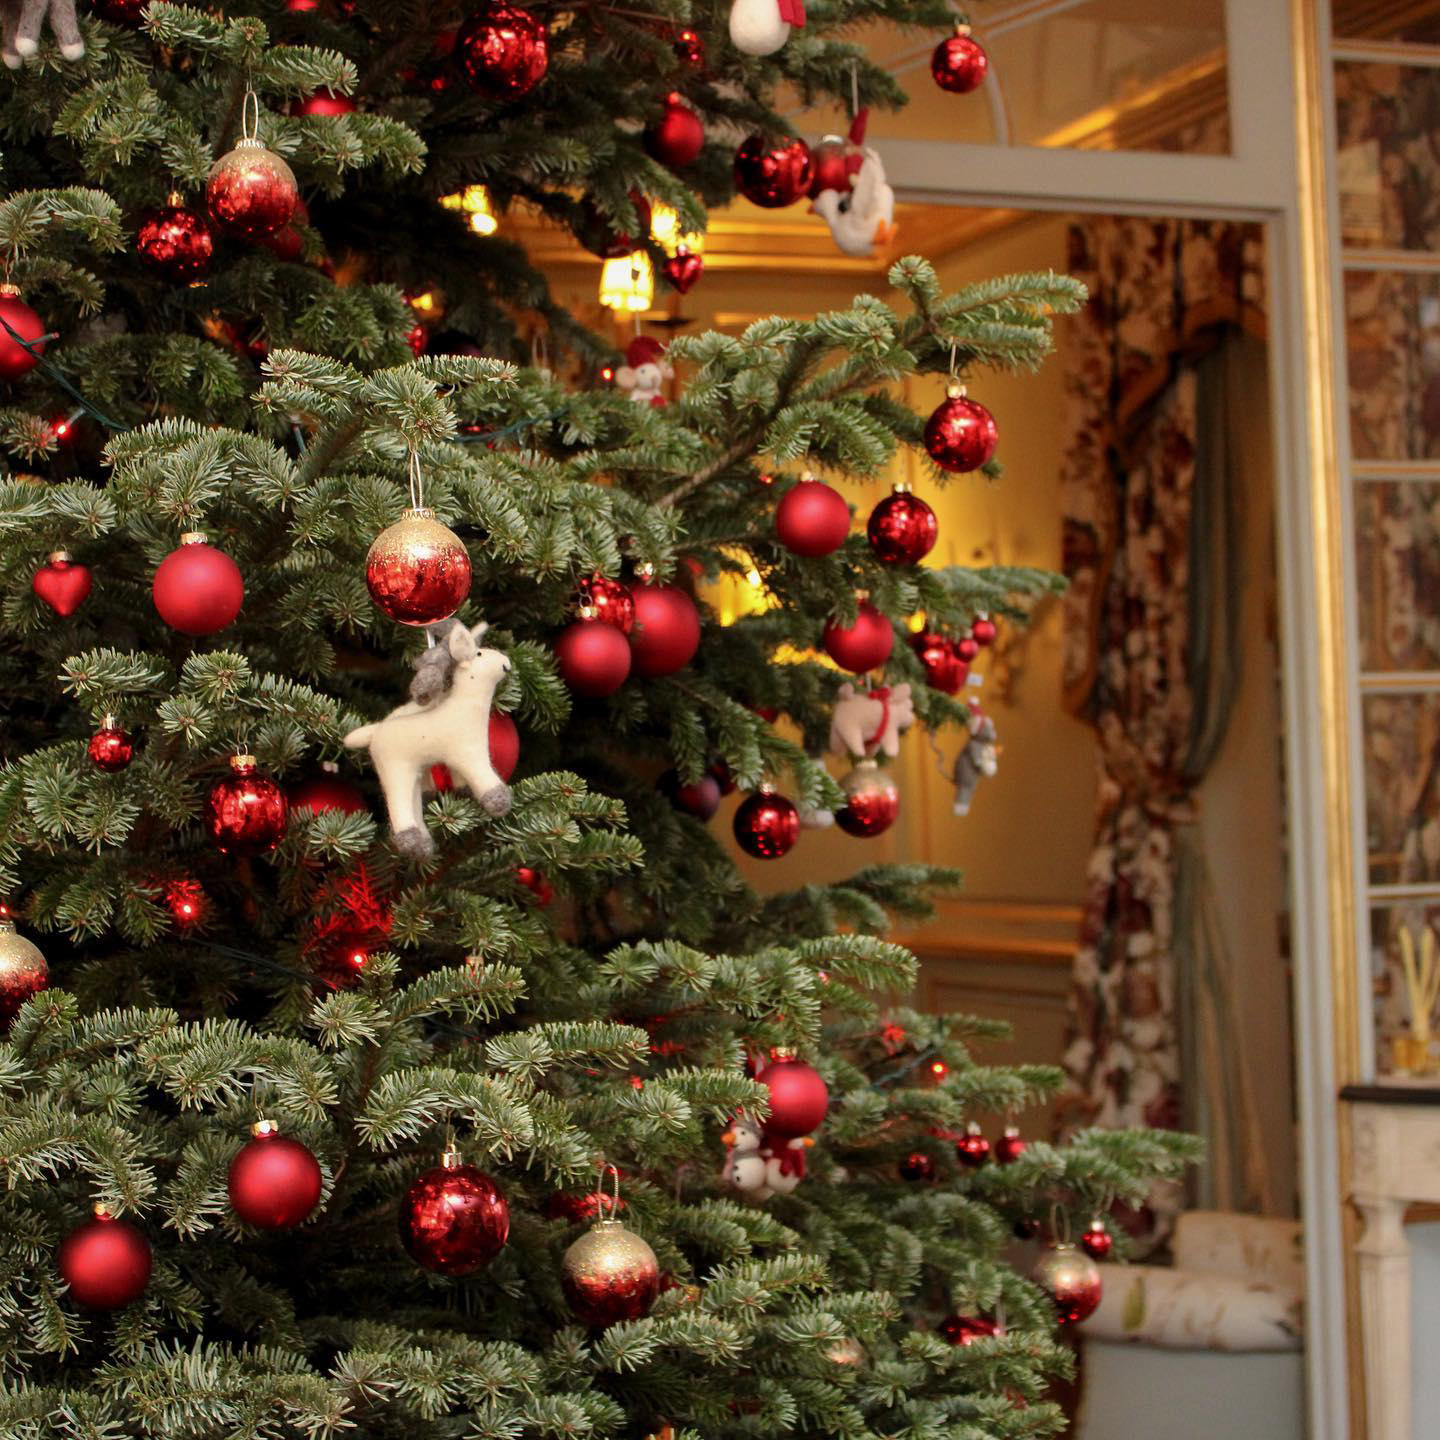 Villa Gallici Relais&Châteaux - It’s beginning to look a lot like Christmas